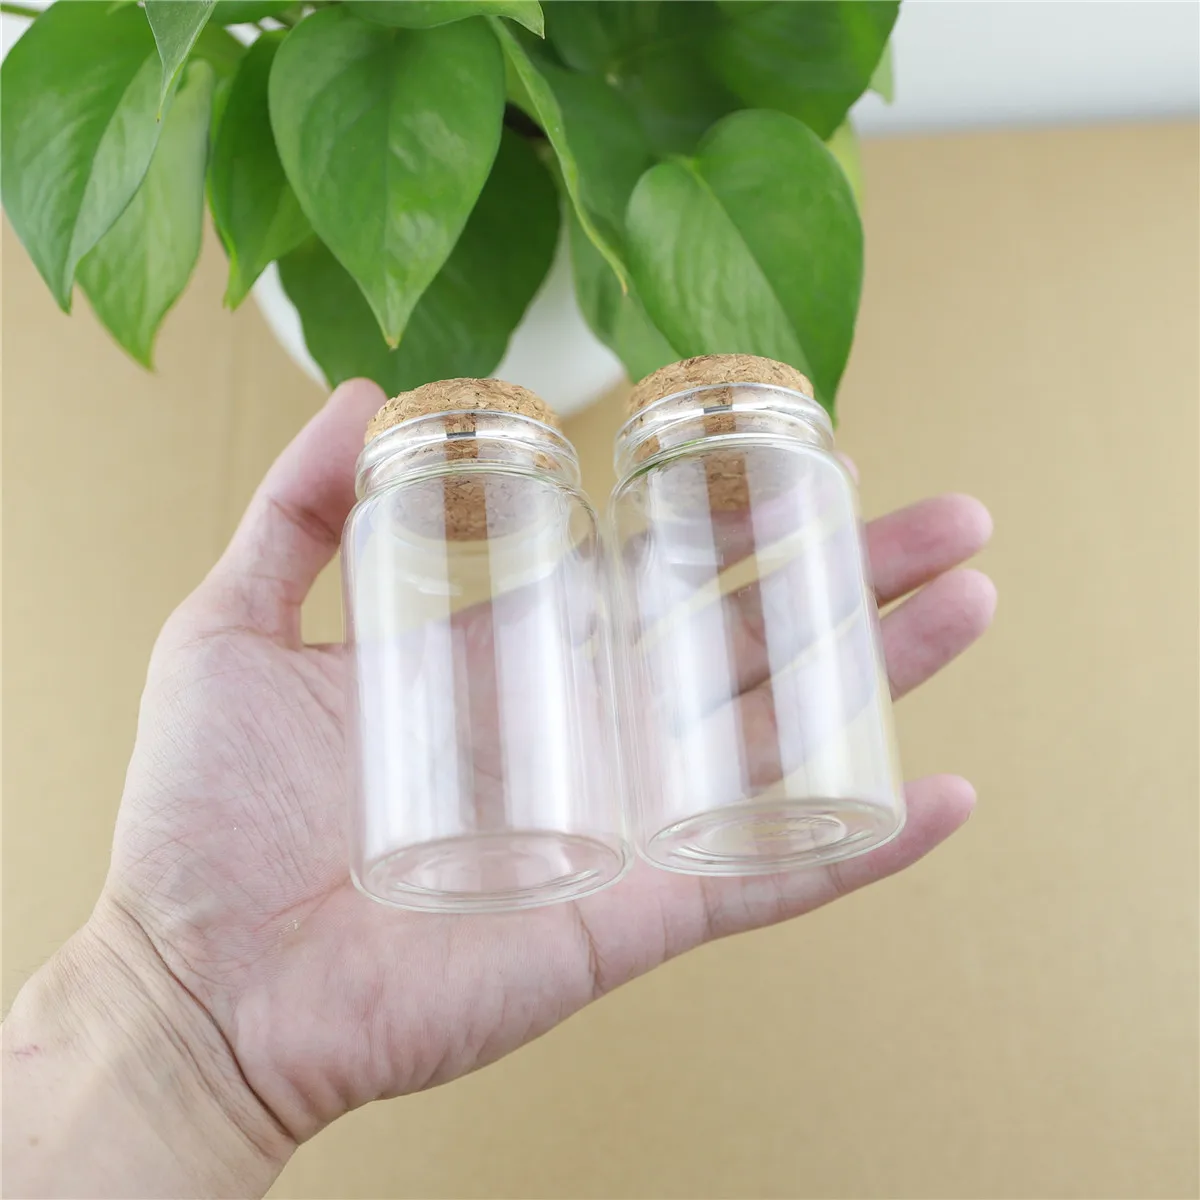 

12pcs/lot 47*80mm 90ml Cork Stopper Glass Bottles Spicy Storage Jar Bottle Containers Glass spice candy Jars Vials DIY Craft